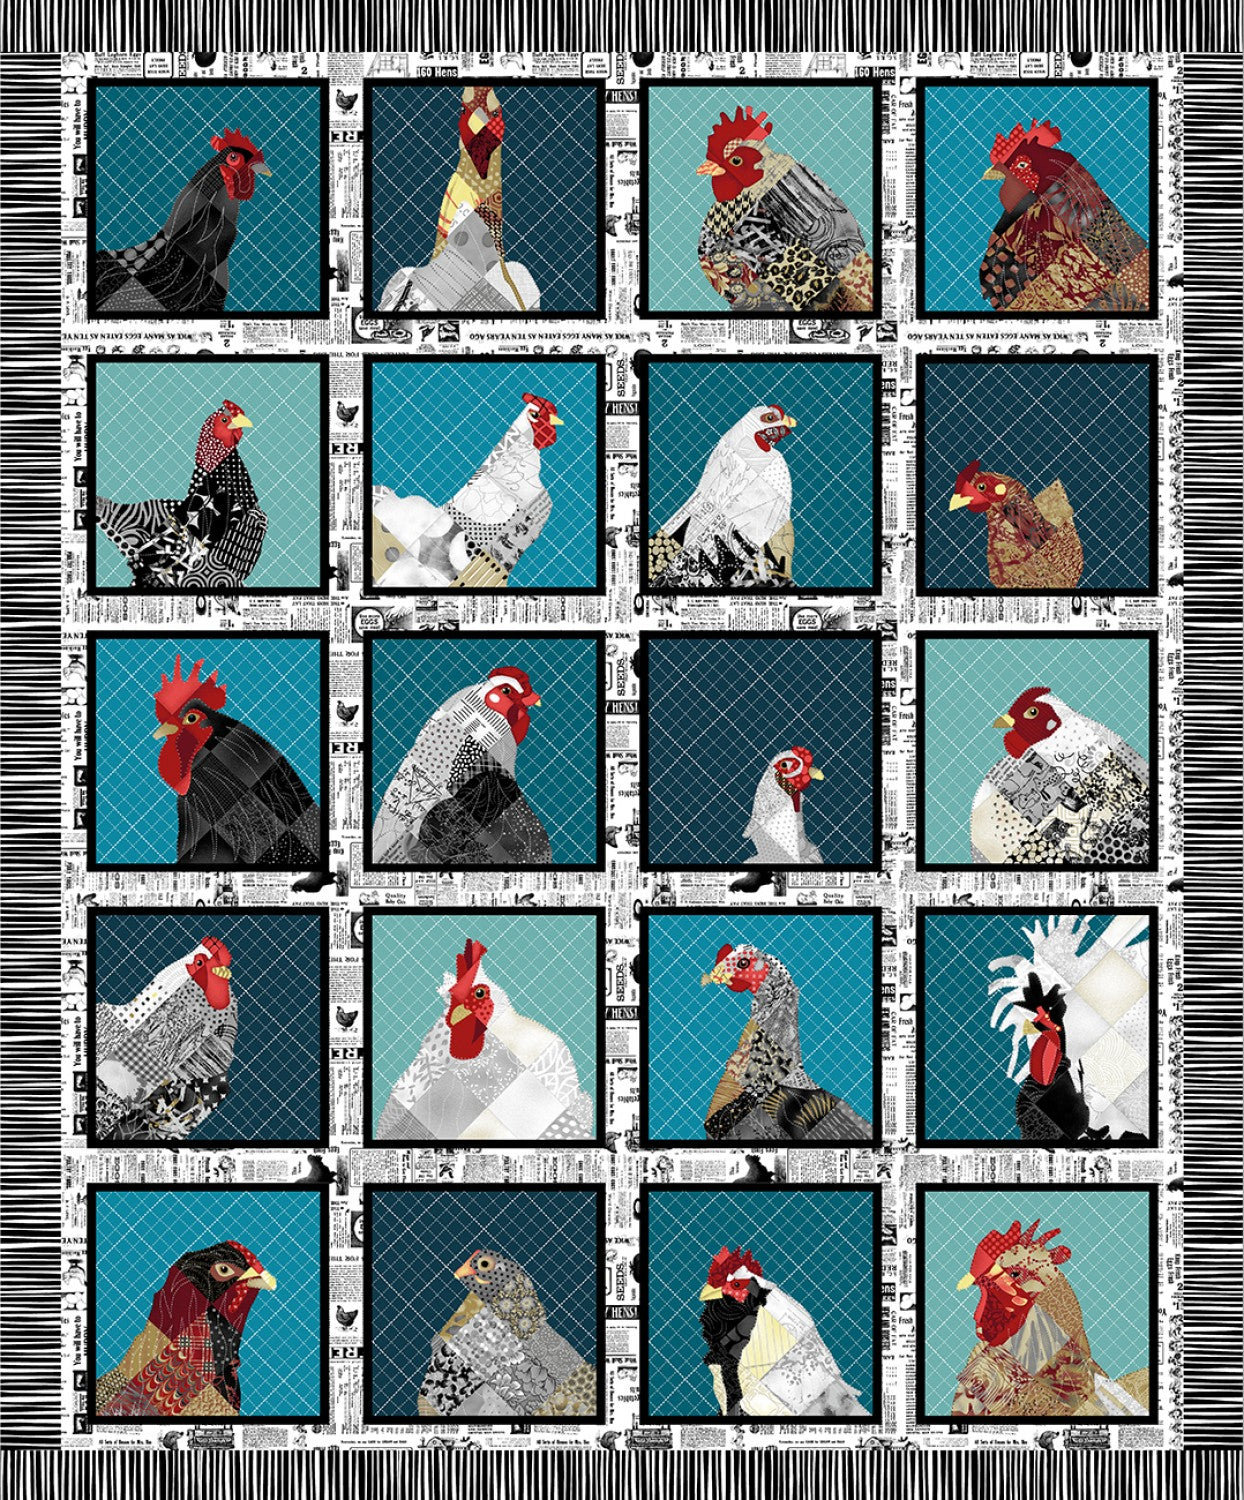 Zooming Chickens mixpaket (1x90/1x60/5x56)